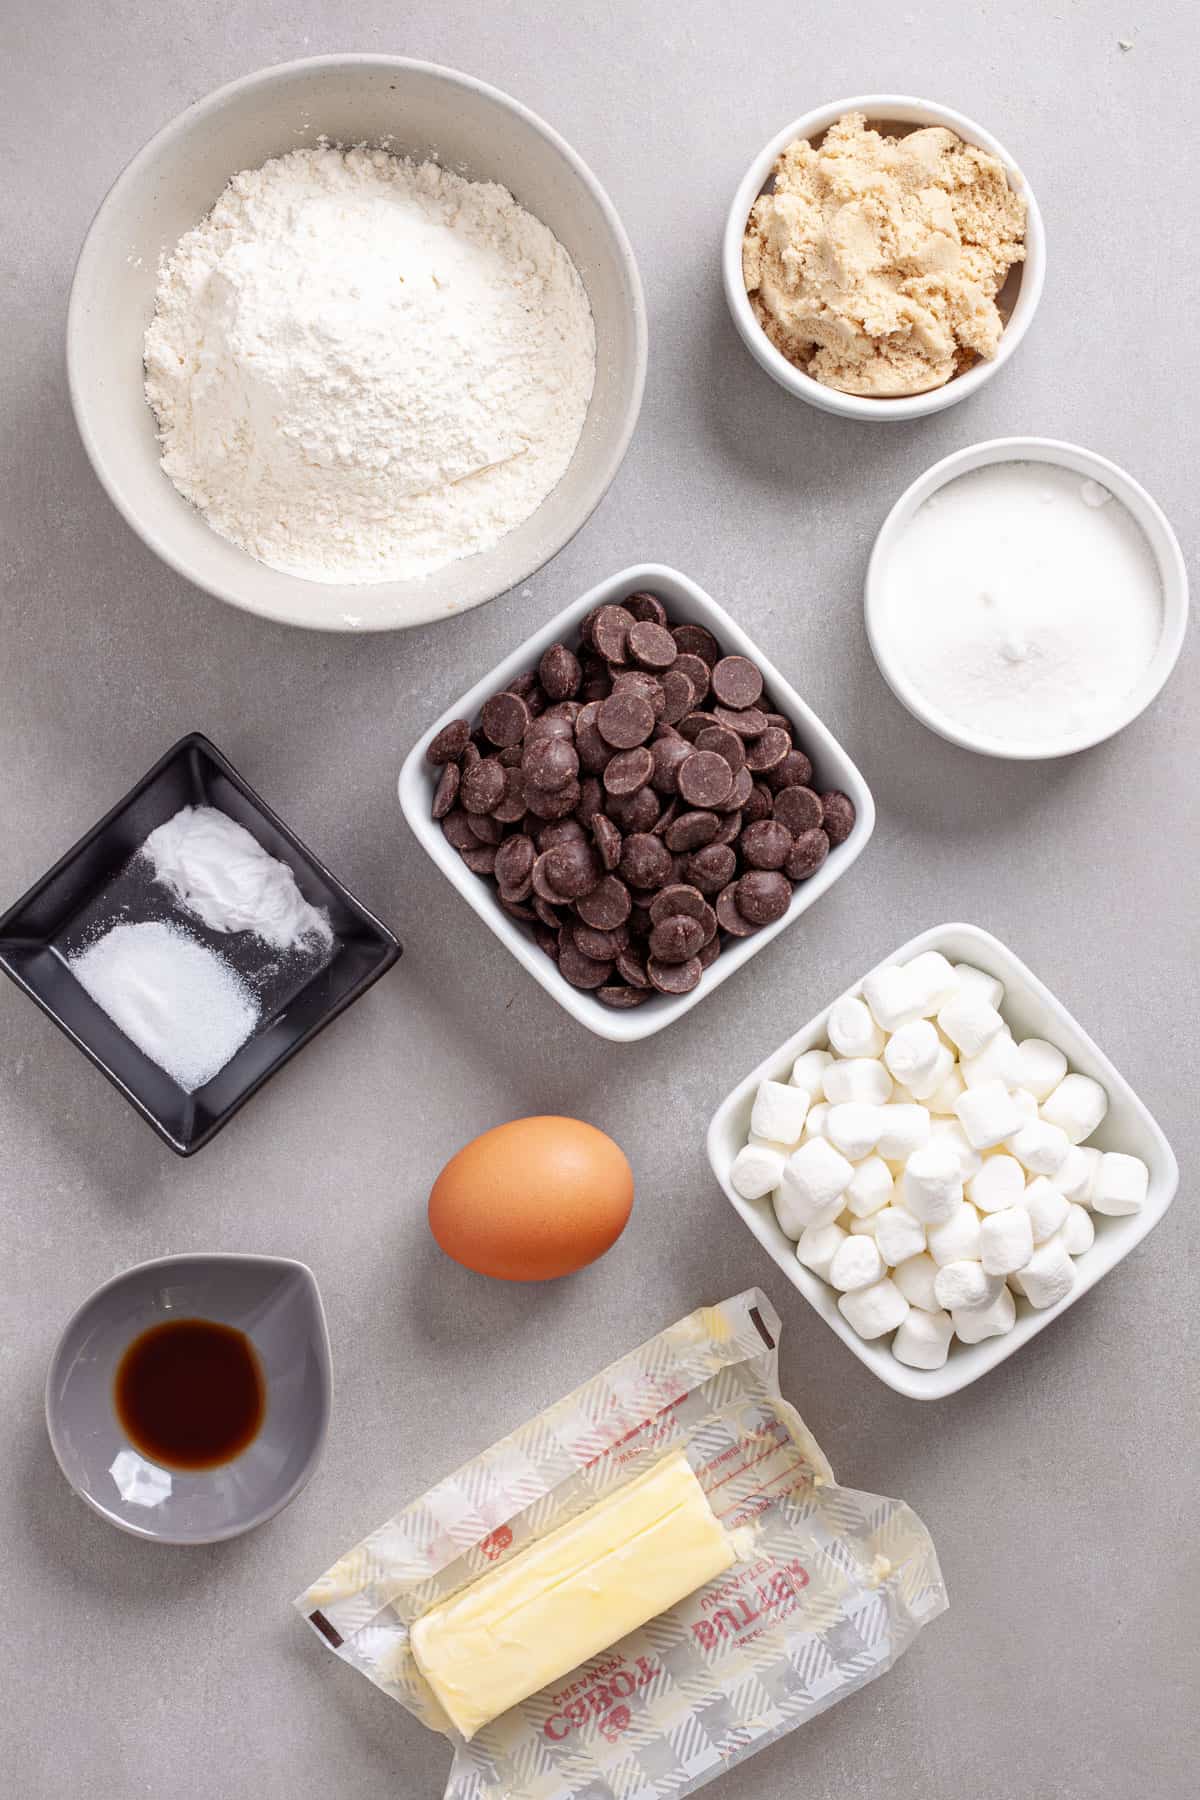 Ingredients for chocolate chip marshmallow cookies on a gray table.